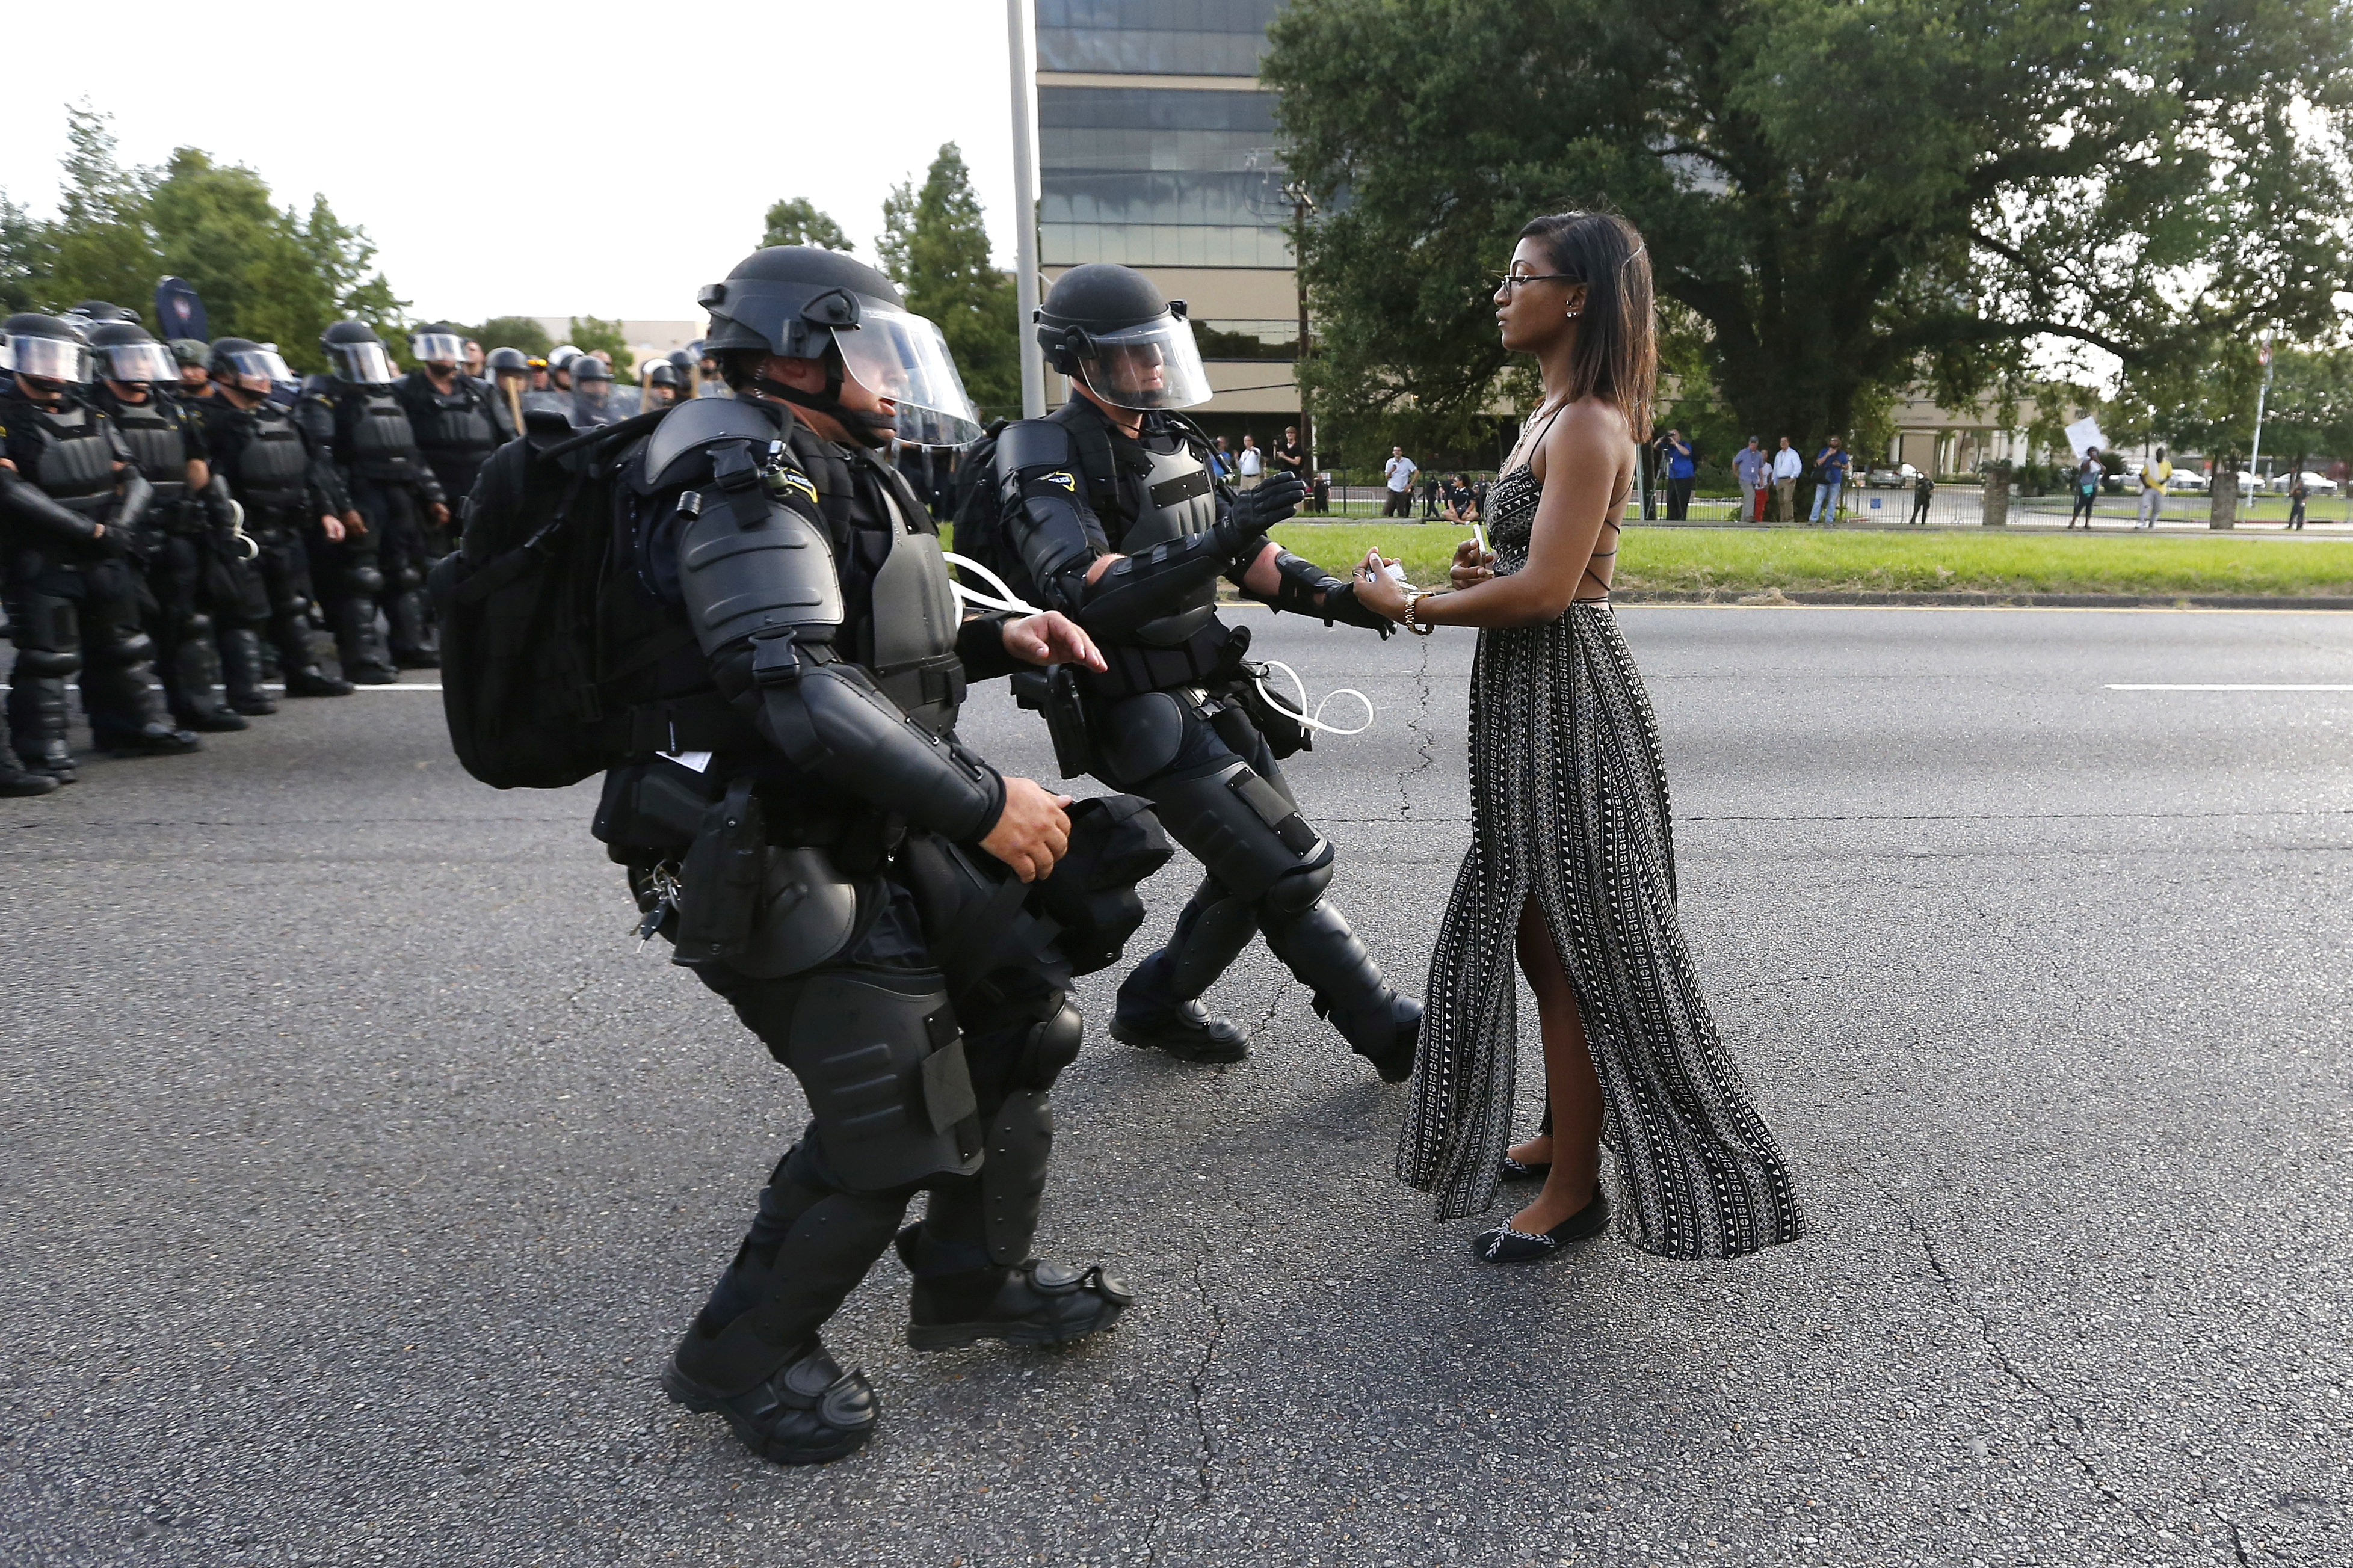 A demonstrator protesting the shooting death of Alton Sterling is detained by law enforcement near the headquarters of the Baton Rouge Police Department in Baton Rouge, La., on July 9, 2016 (Jonathan Bachman—Reuters)